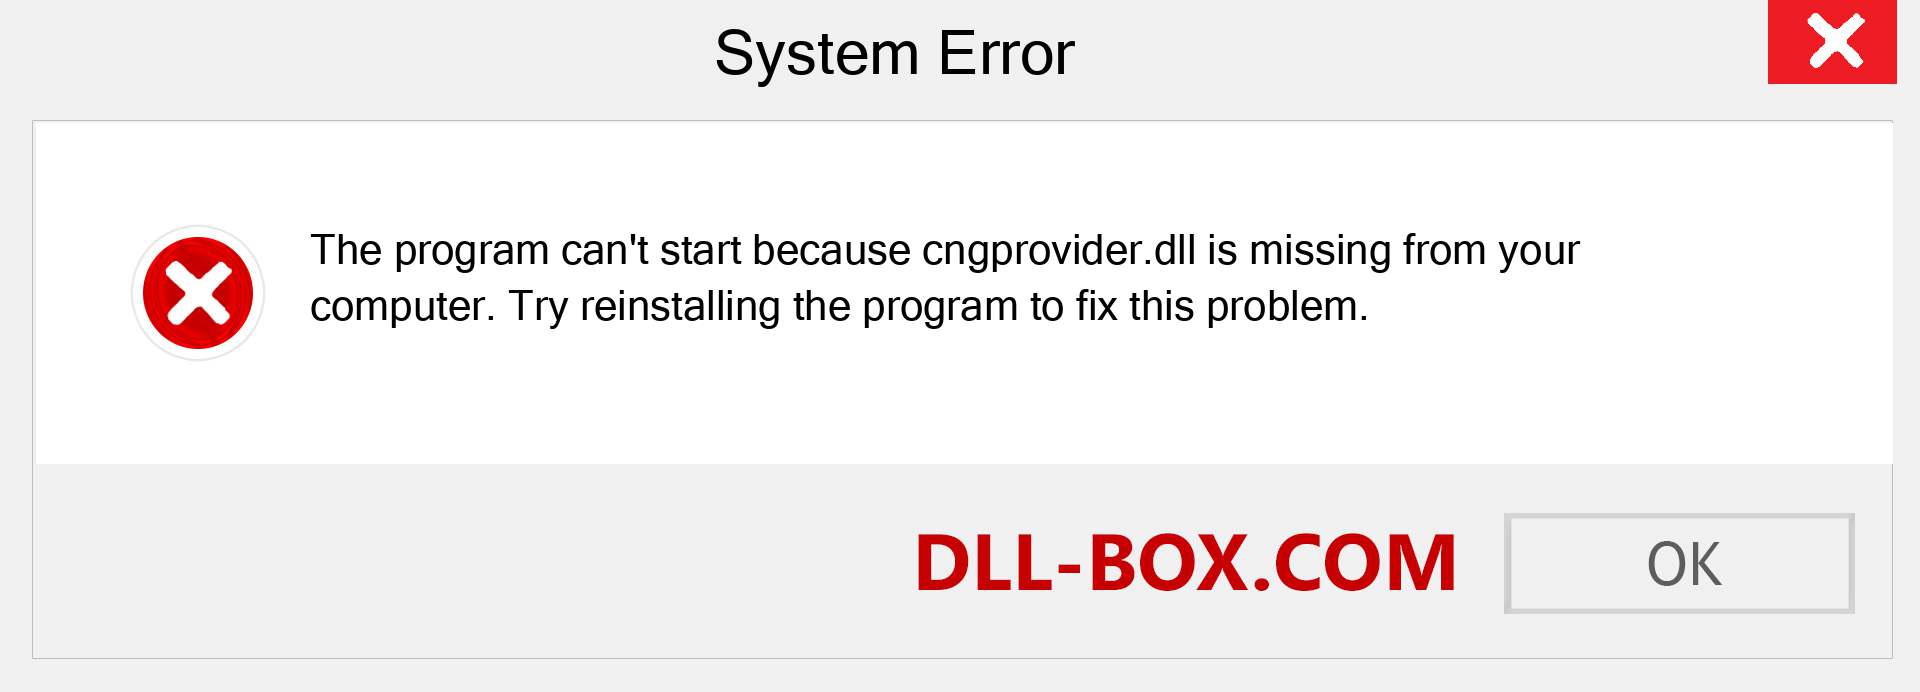  cngprovider.dll file is missing?. Download for Windows 7, 8, 10 - Fix  cngprovider dll Missing Error on Windows, photos, images